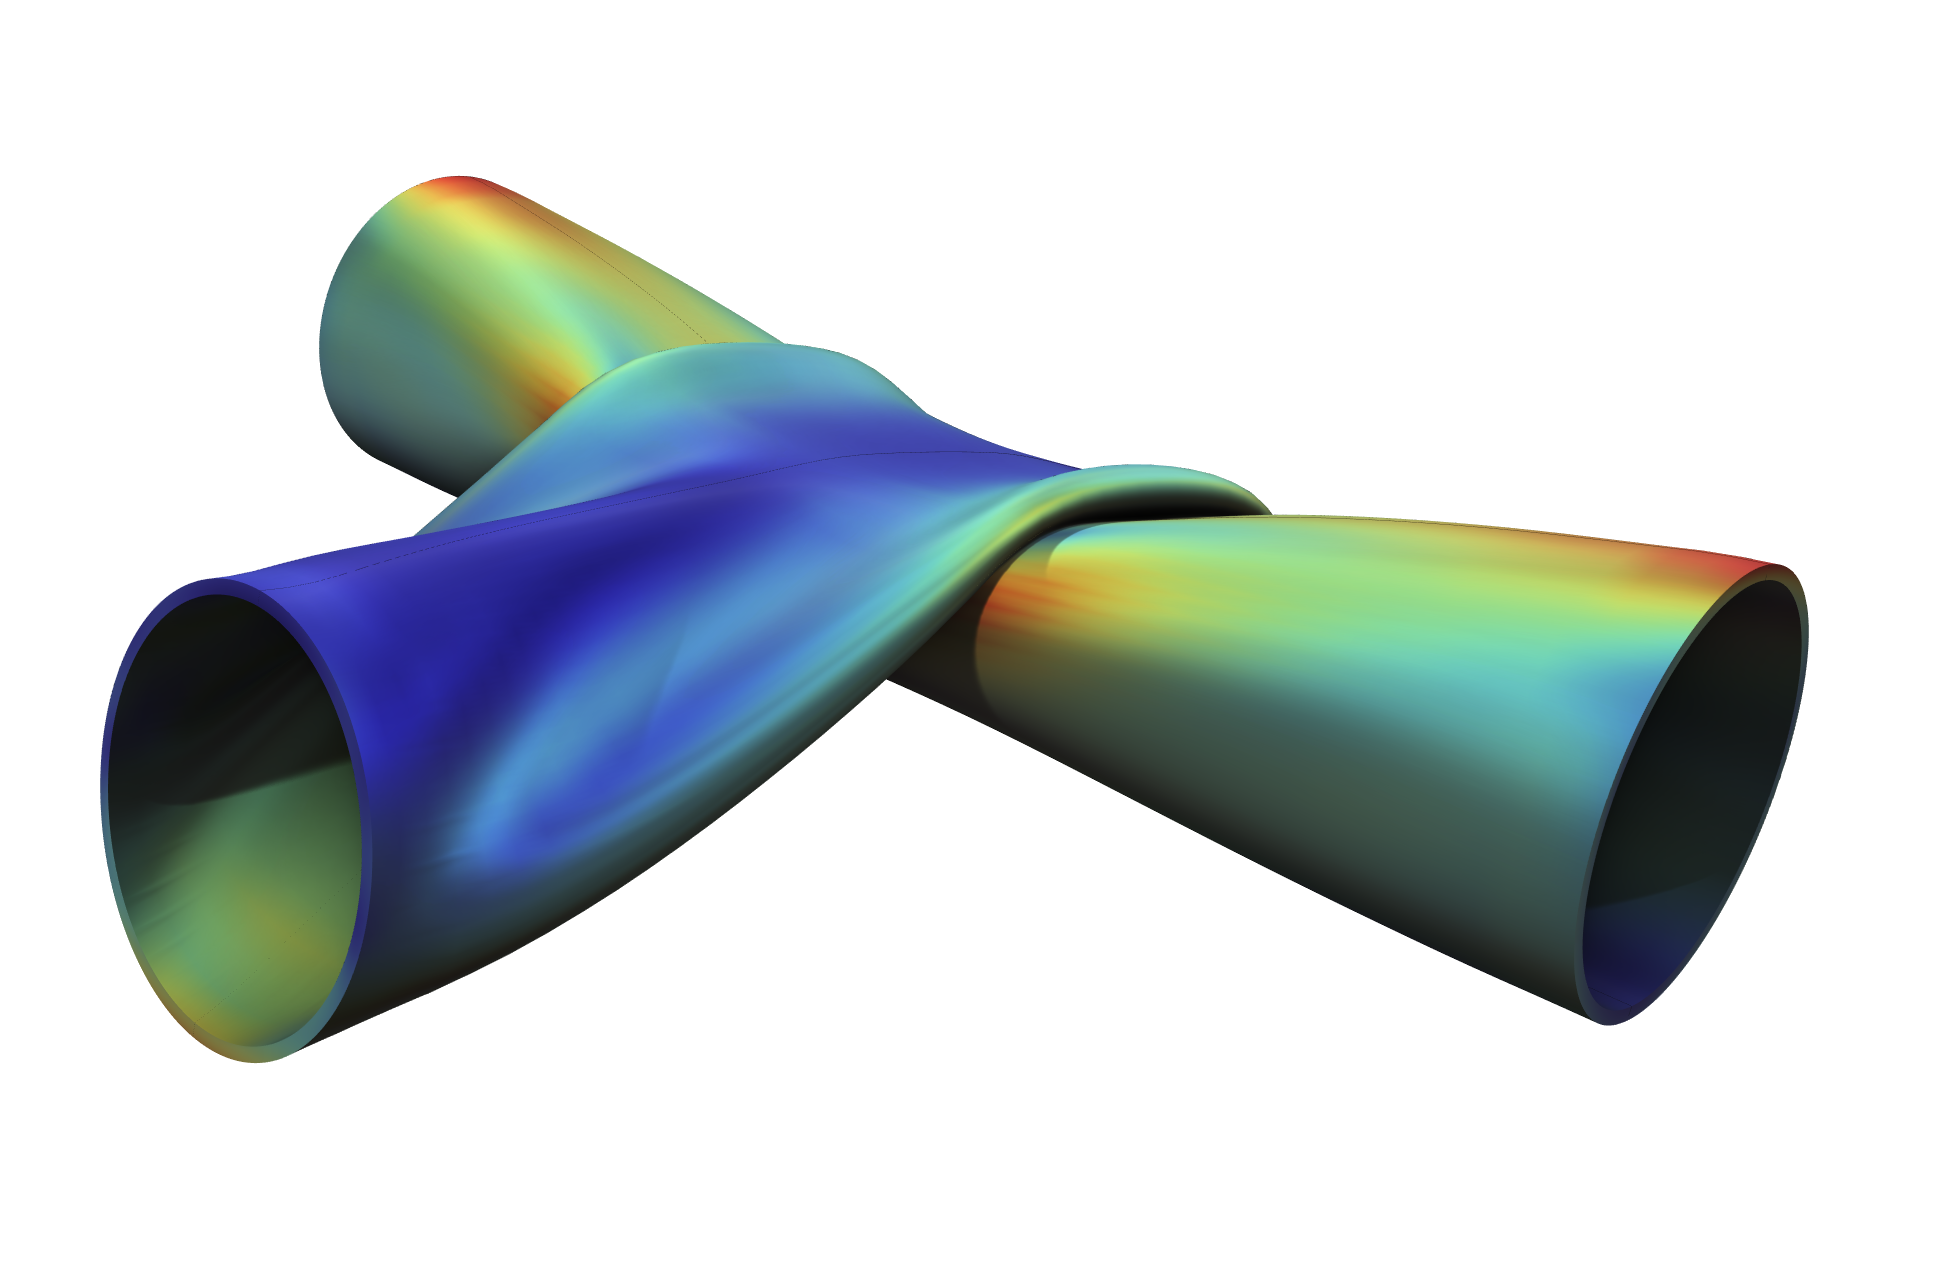 A structural analysis visualizes the stress and deformation of two metal tubes in mechanical contact.